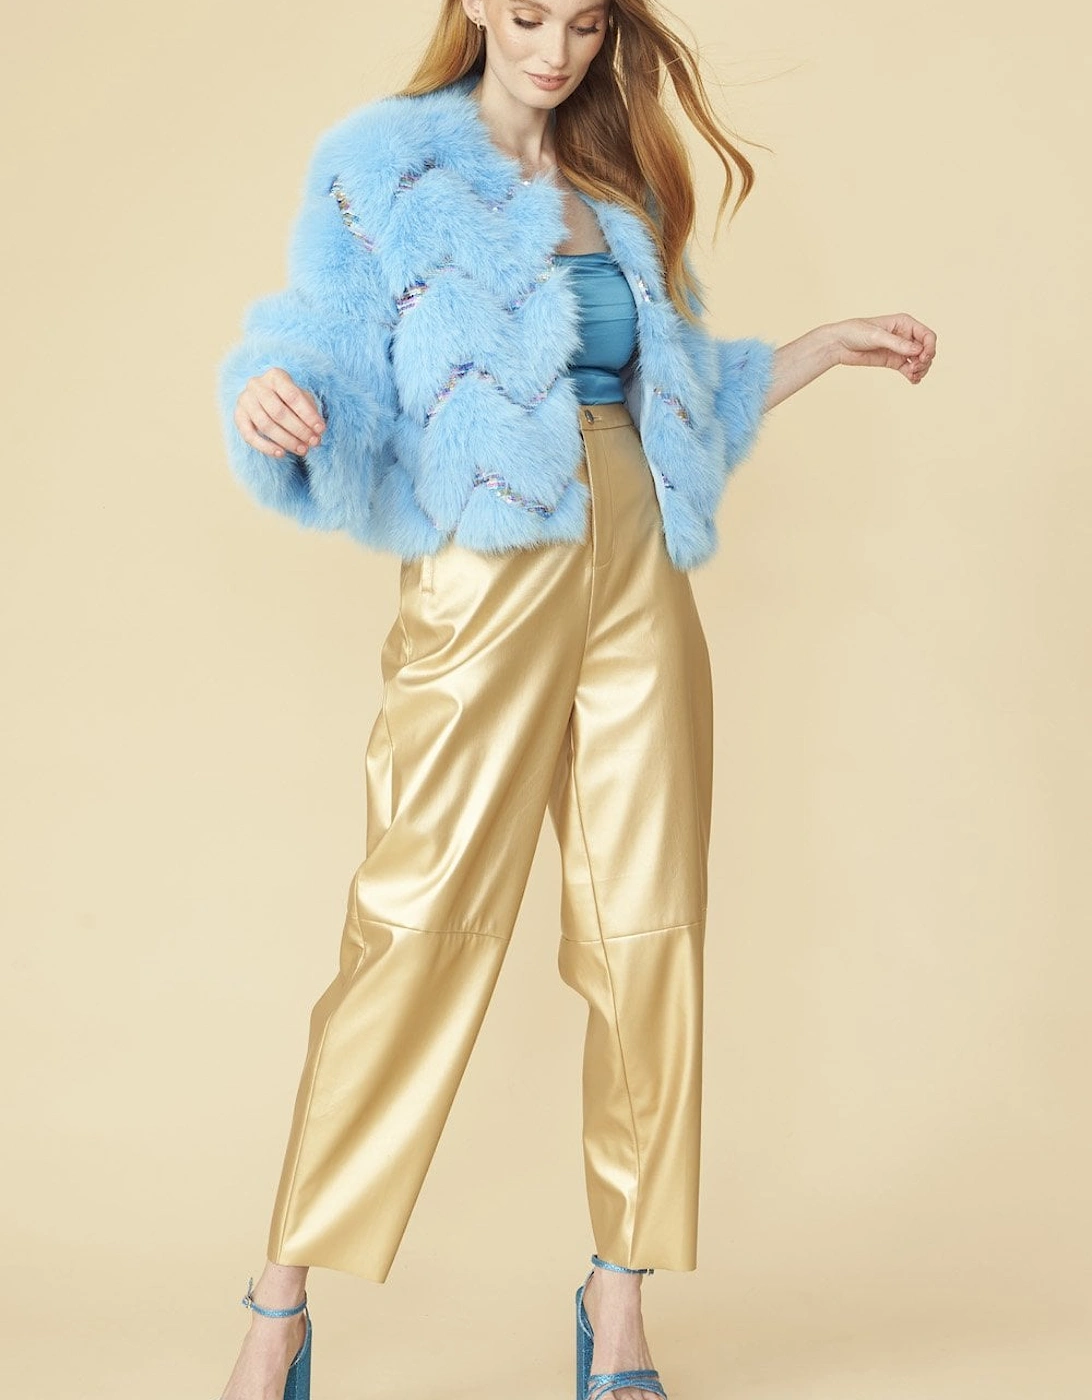 Bamboo Sequin Eco Faux Fur Coat in Blue